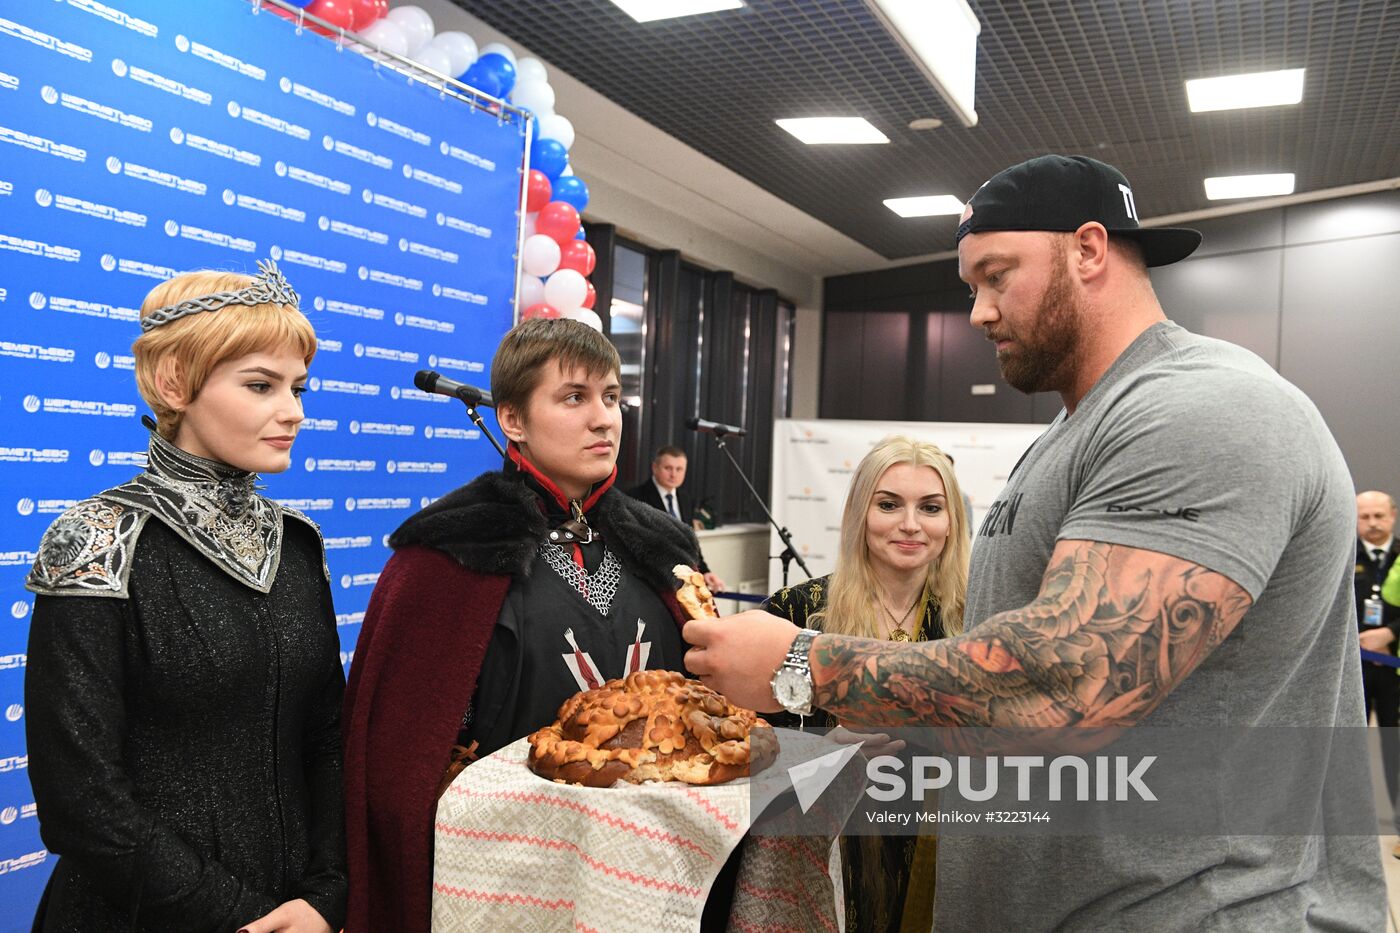 Game of Thrones star Hafthor Bjornsson welcomed at Sheremetyevo Airport